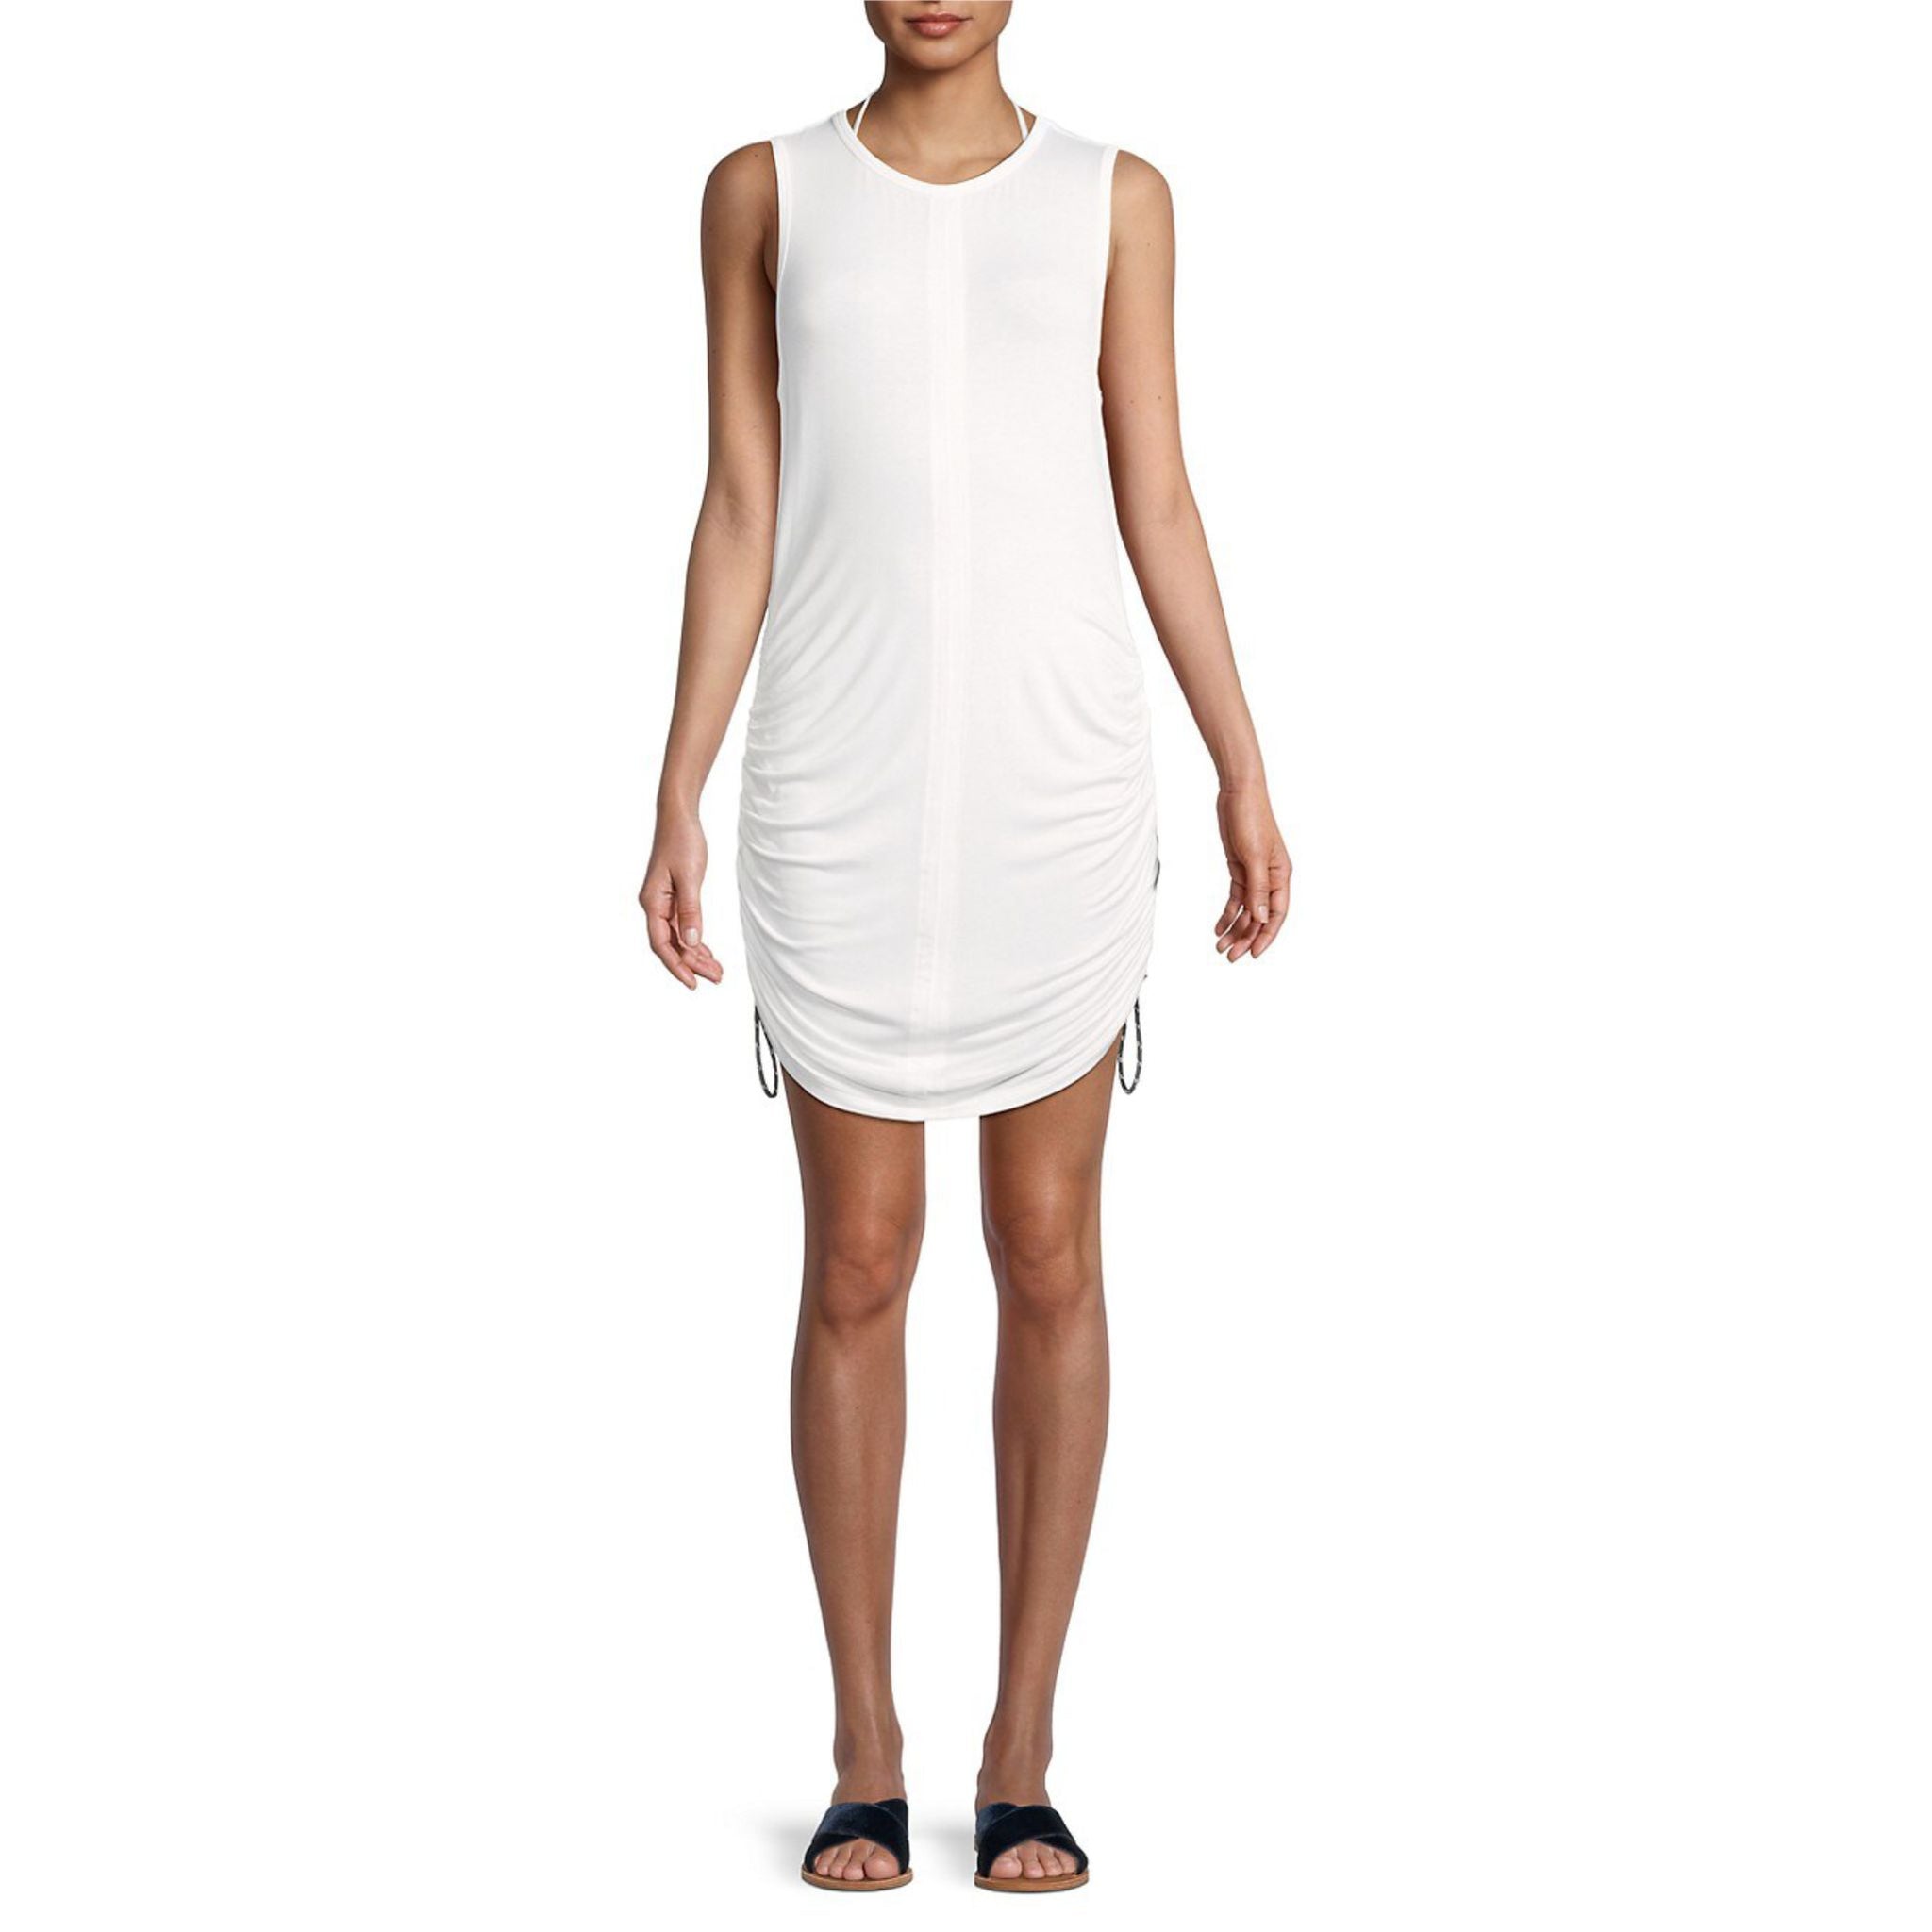 DKNY Ruched Coverup Dress - White